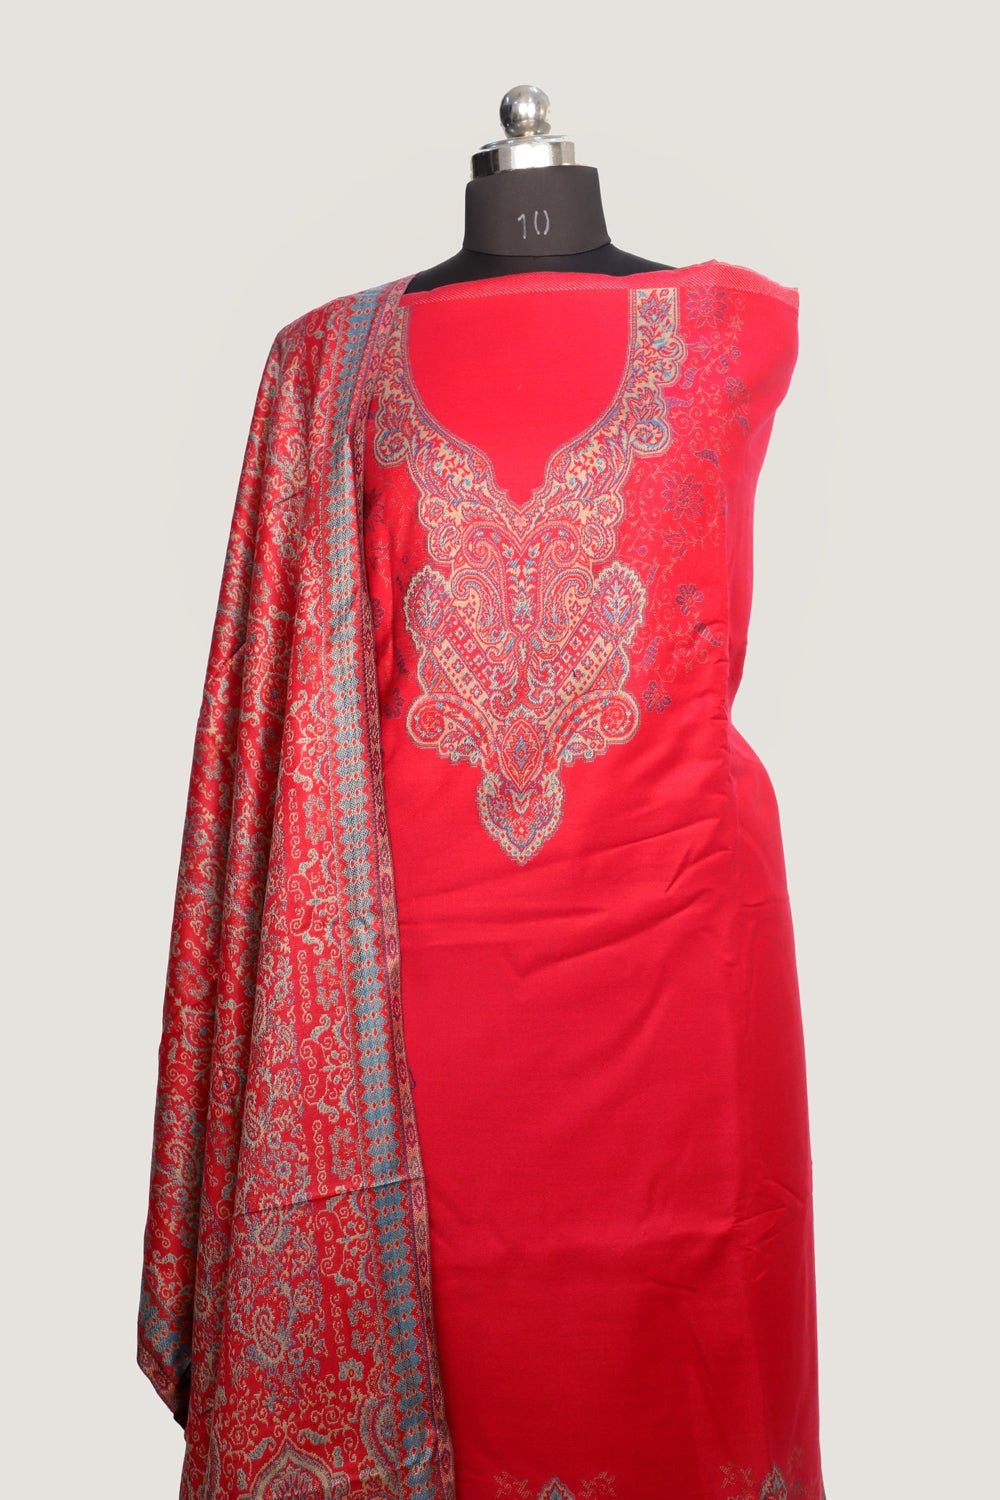 Pink Colour Designer With Beautiful Kashmiri Embroidery Suit